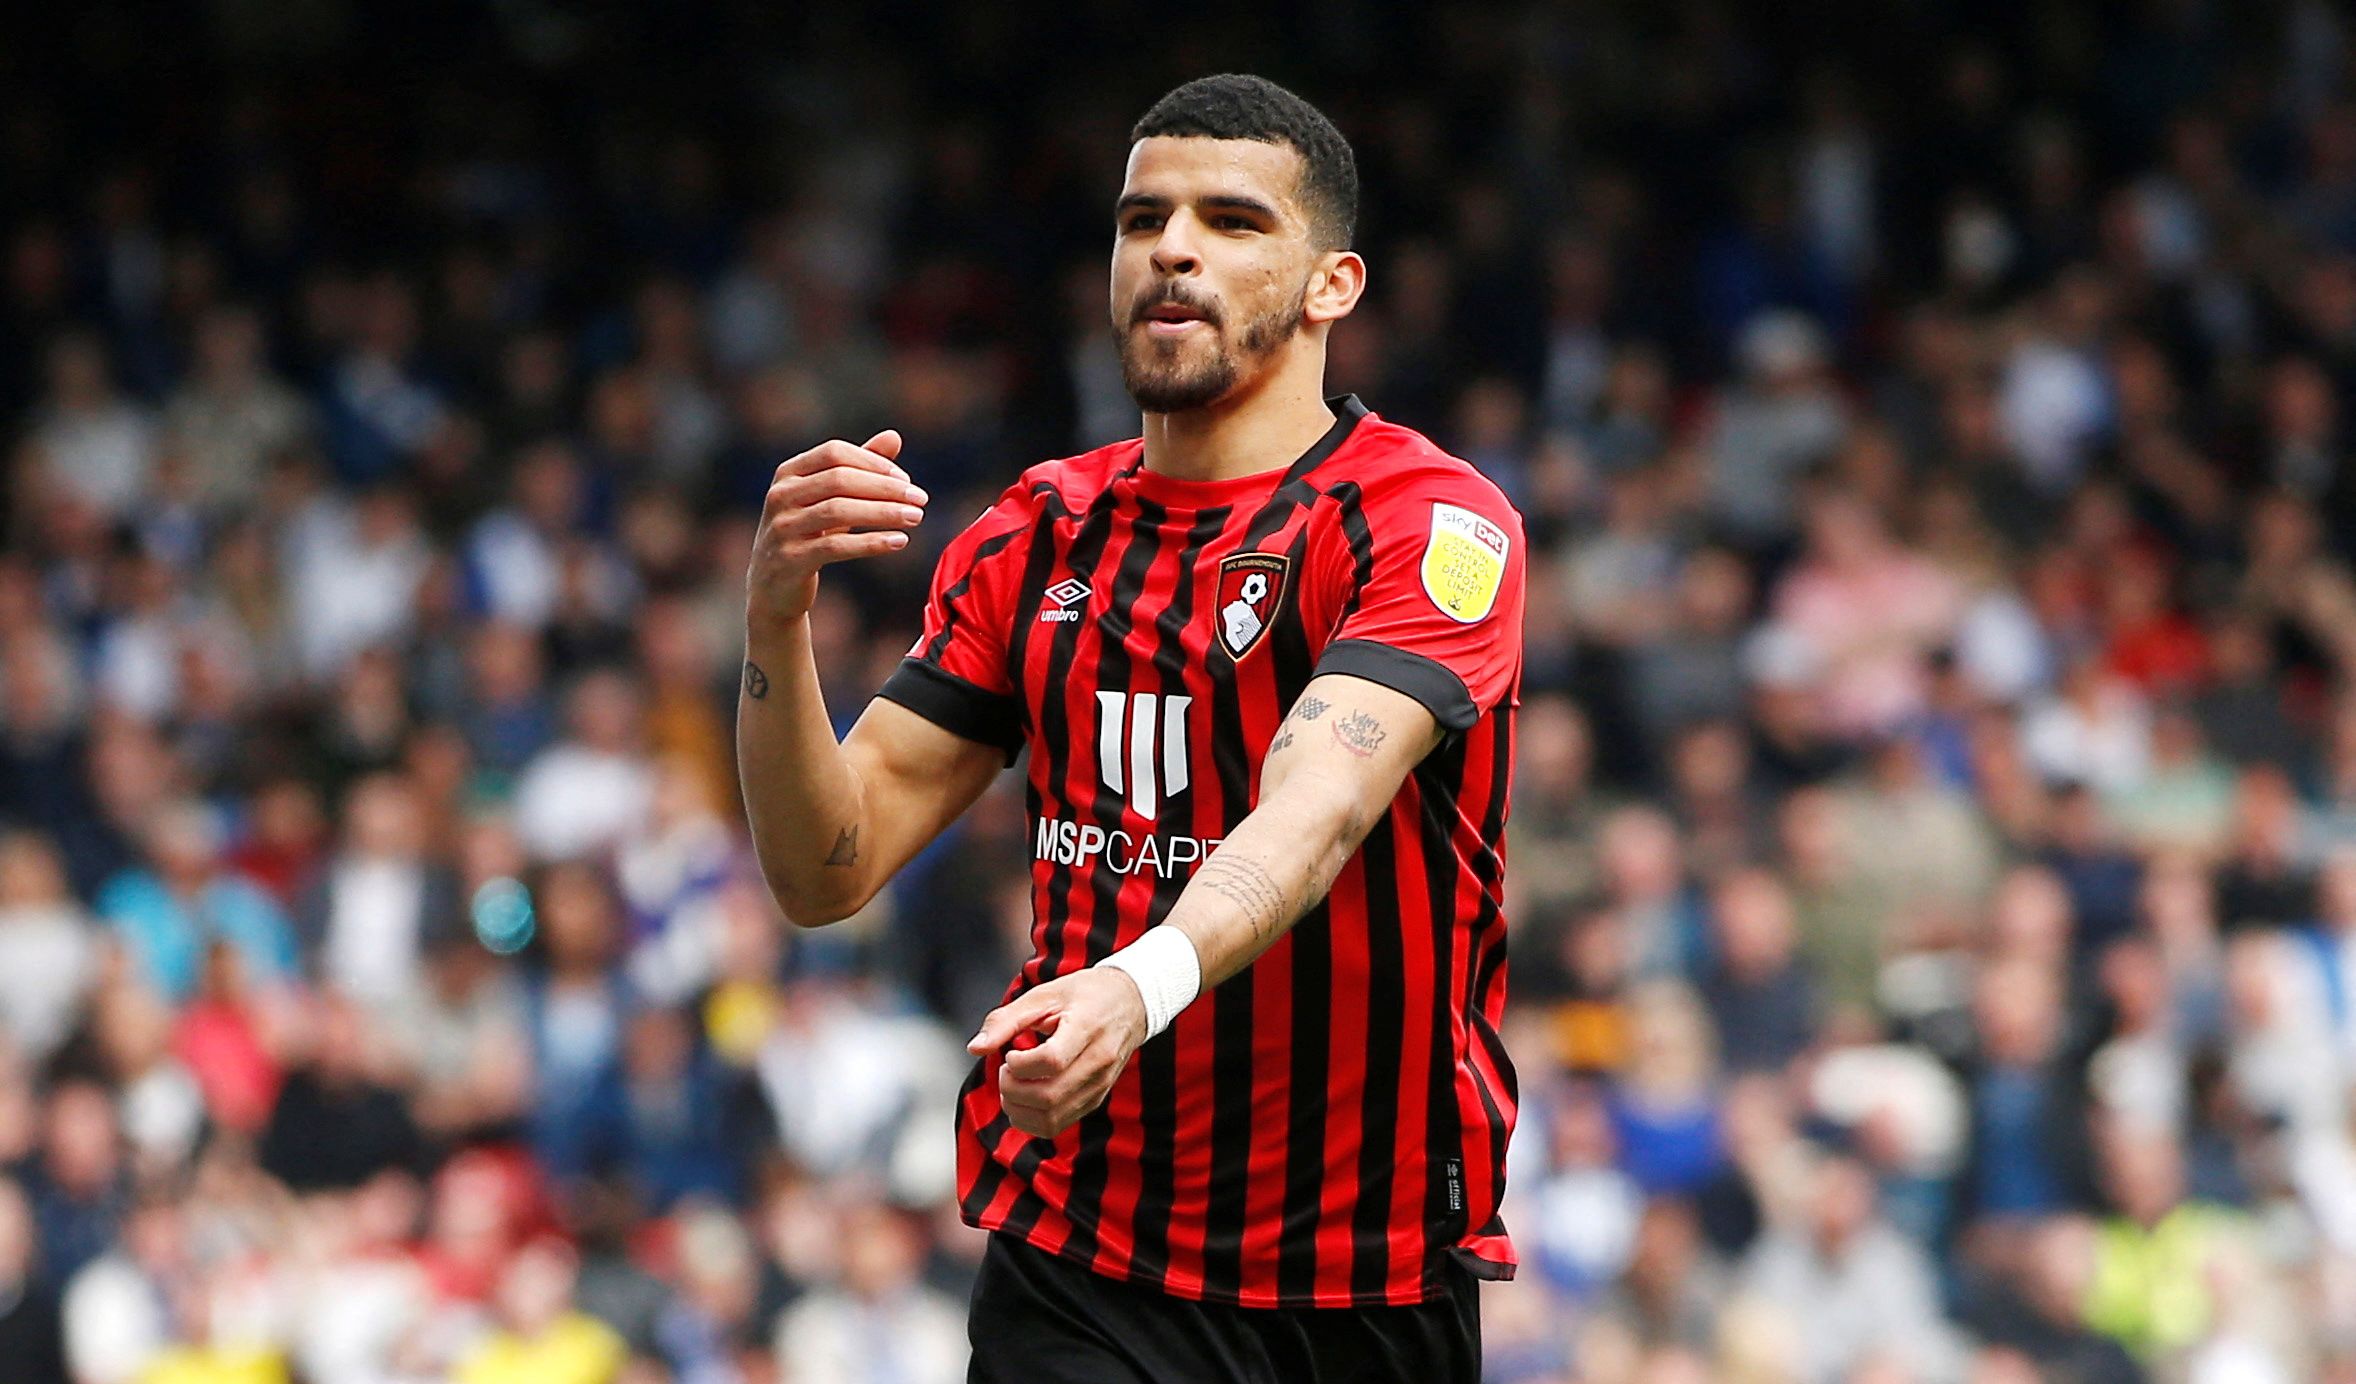 Soccer Football - Championship - Blackburn Rovers v AFC Bournemouth - Ewood Park, Blackburn, Britain - April 30, 2022 AFC Bournemouth's Dominic Solanke celebrates scoring their first goal  Action Images/Craig Brough  EDITORIAL USE ONLY. No use with unauthorized audio, video, data, fixture lists, club/league logos or 